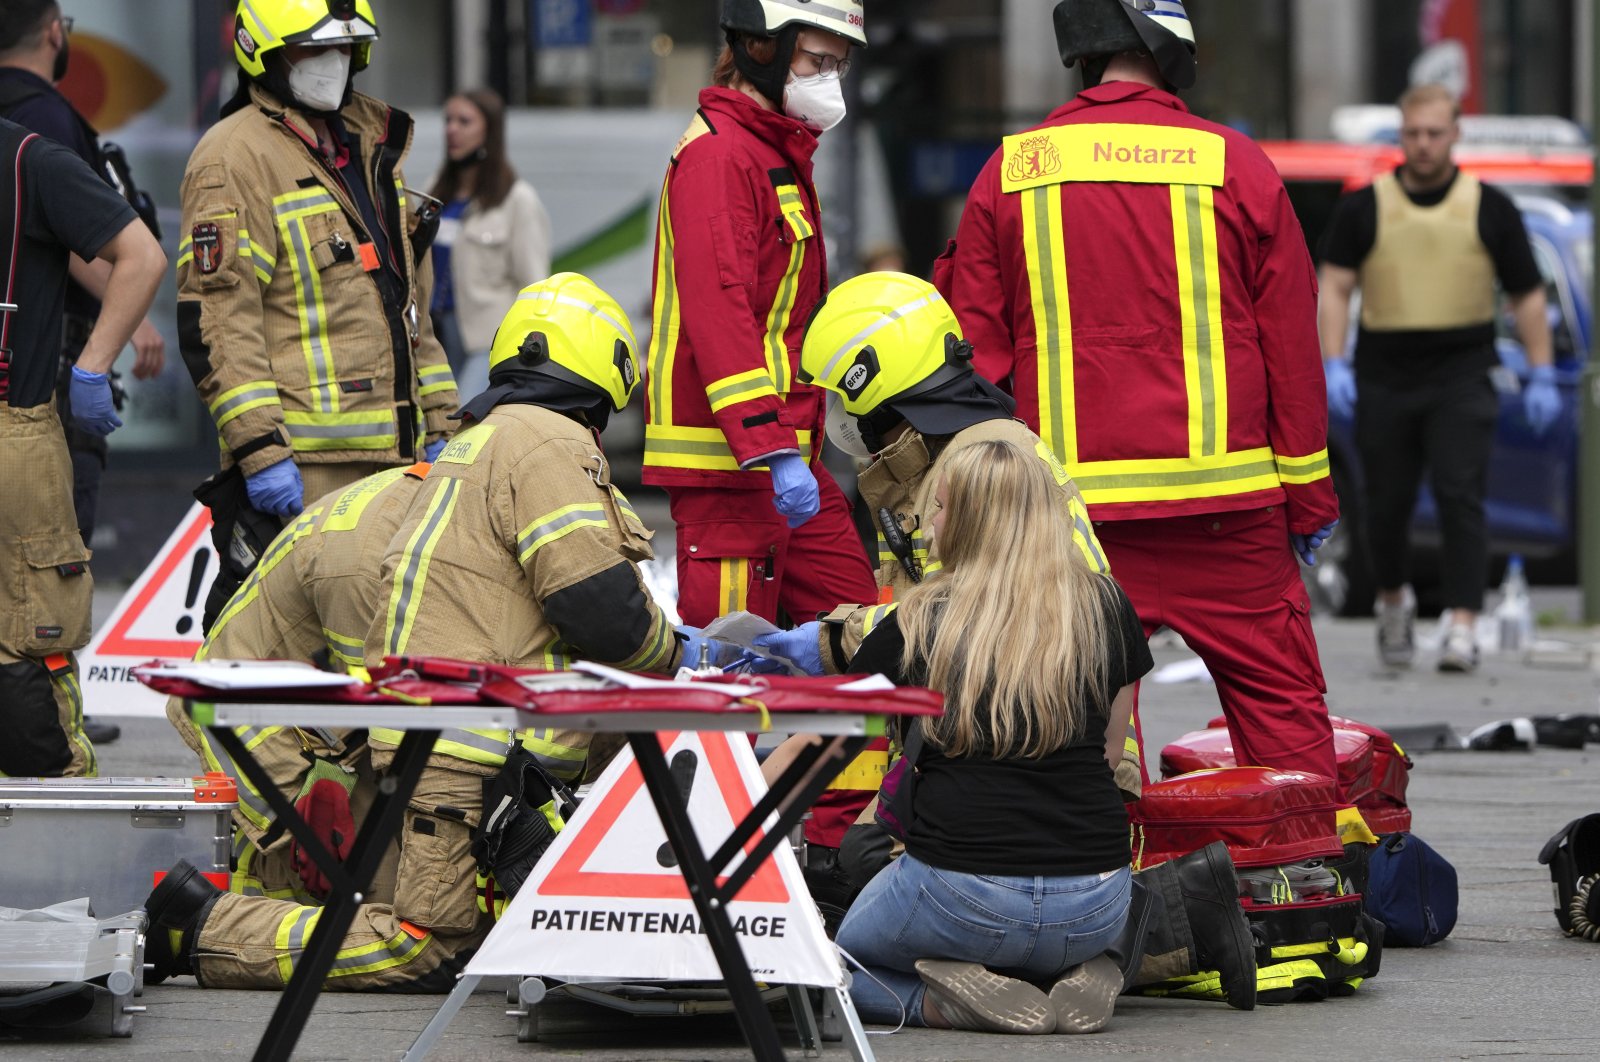 Rescue workers help an injured person after a car crashed into a crowd of people in central Berlin, Germany, June 8, 2022. (AP Photo)